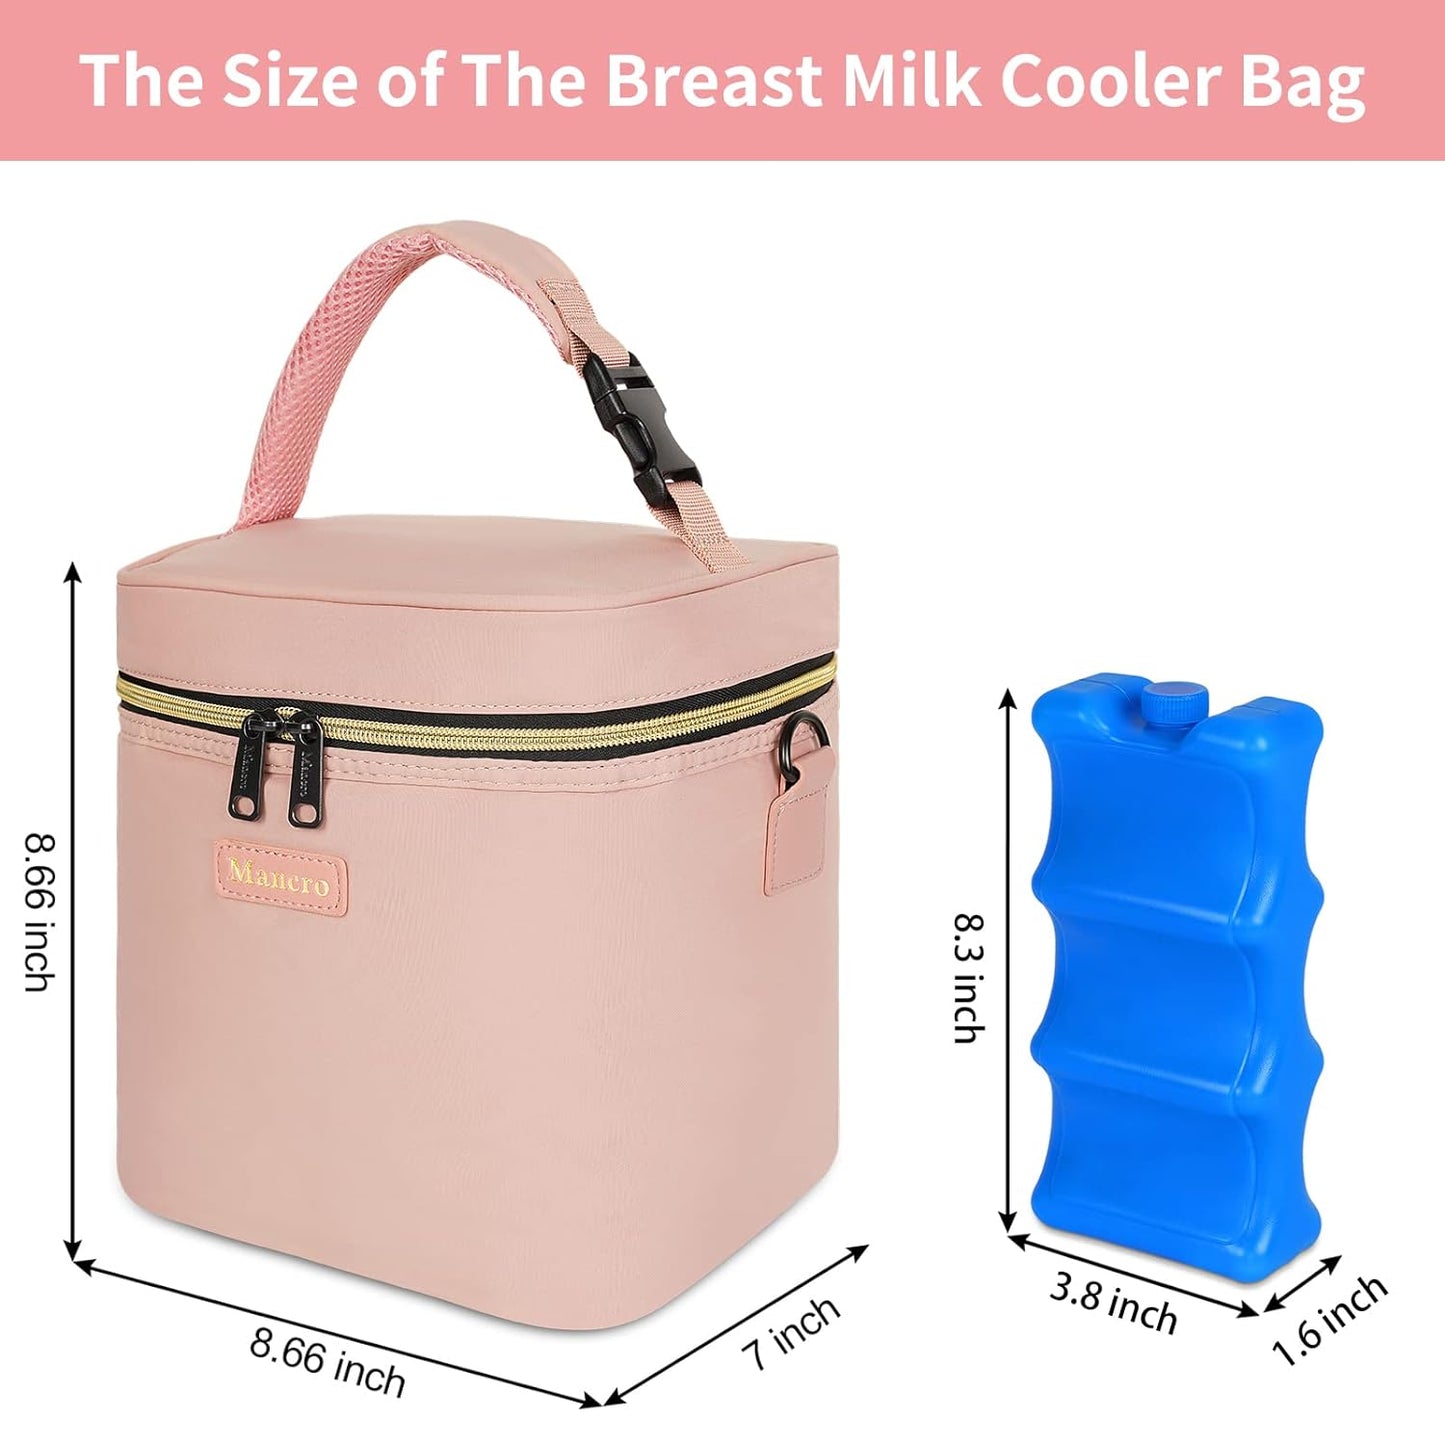 Mancro Breastmilk Cooler Bag with Ice Pack, Fits 6 Baby Bottles Up to 9 Ounce Insulated Bottle Bag, Breast Milk on The go Strap, for Nursing Mom Daycare, Black